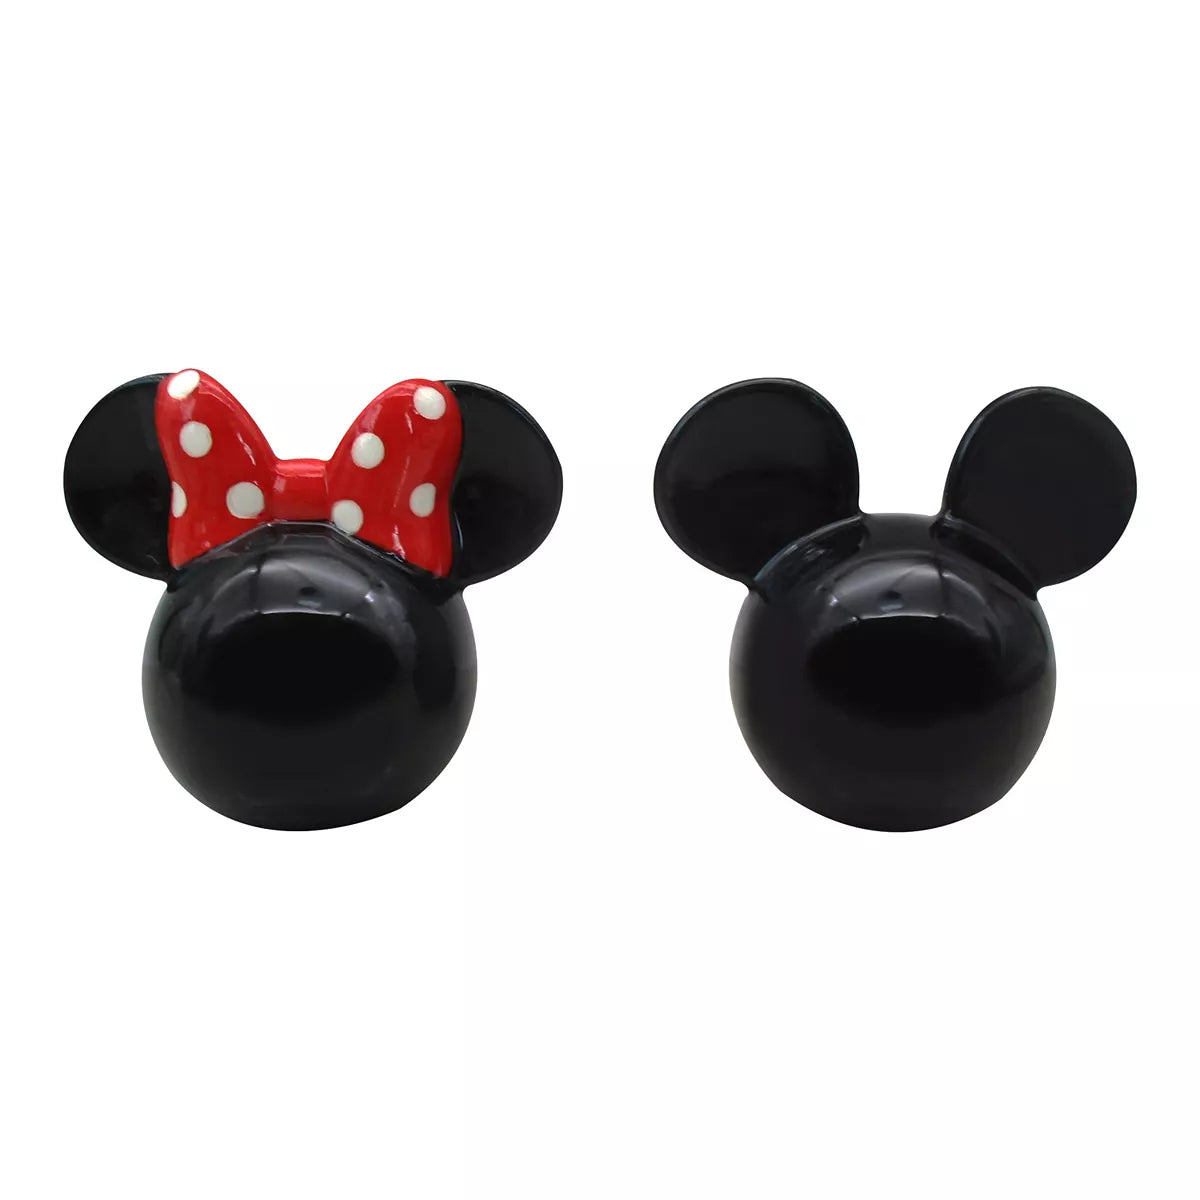 MICKEY AND MINNIE CLASSIC CERAMIC SALT AND PEPPER SHAKERS